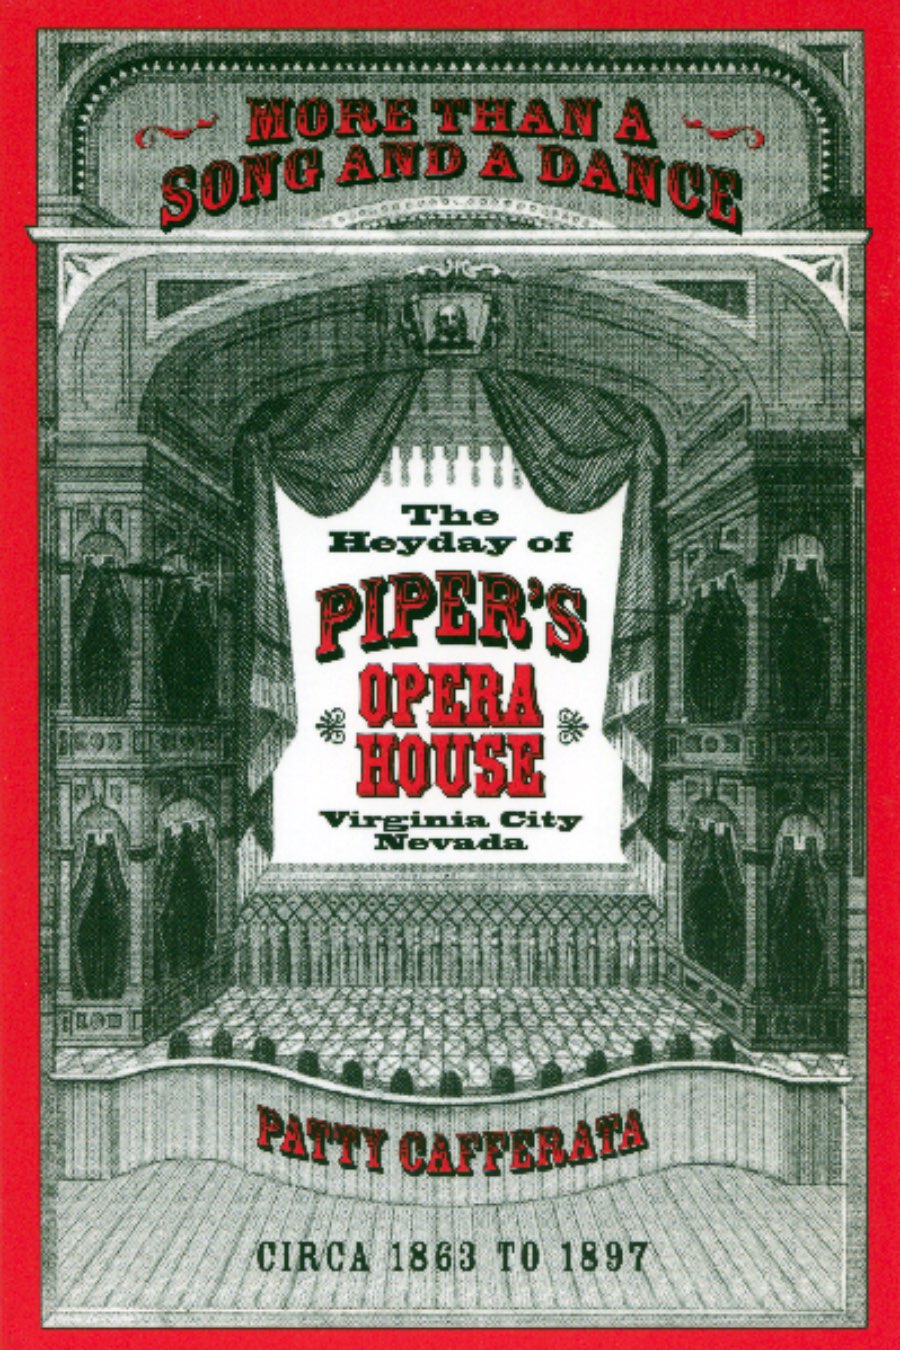 more-than-a-song-and-a-dance-the-heyday-of-piper-s-opera-house-virginia-city-nevada Image